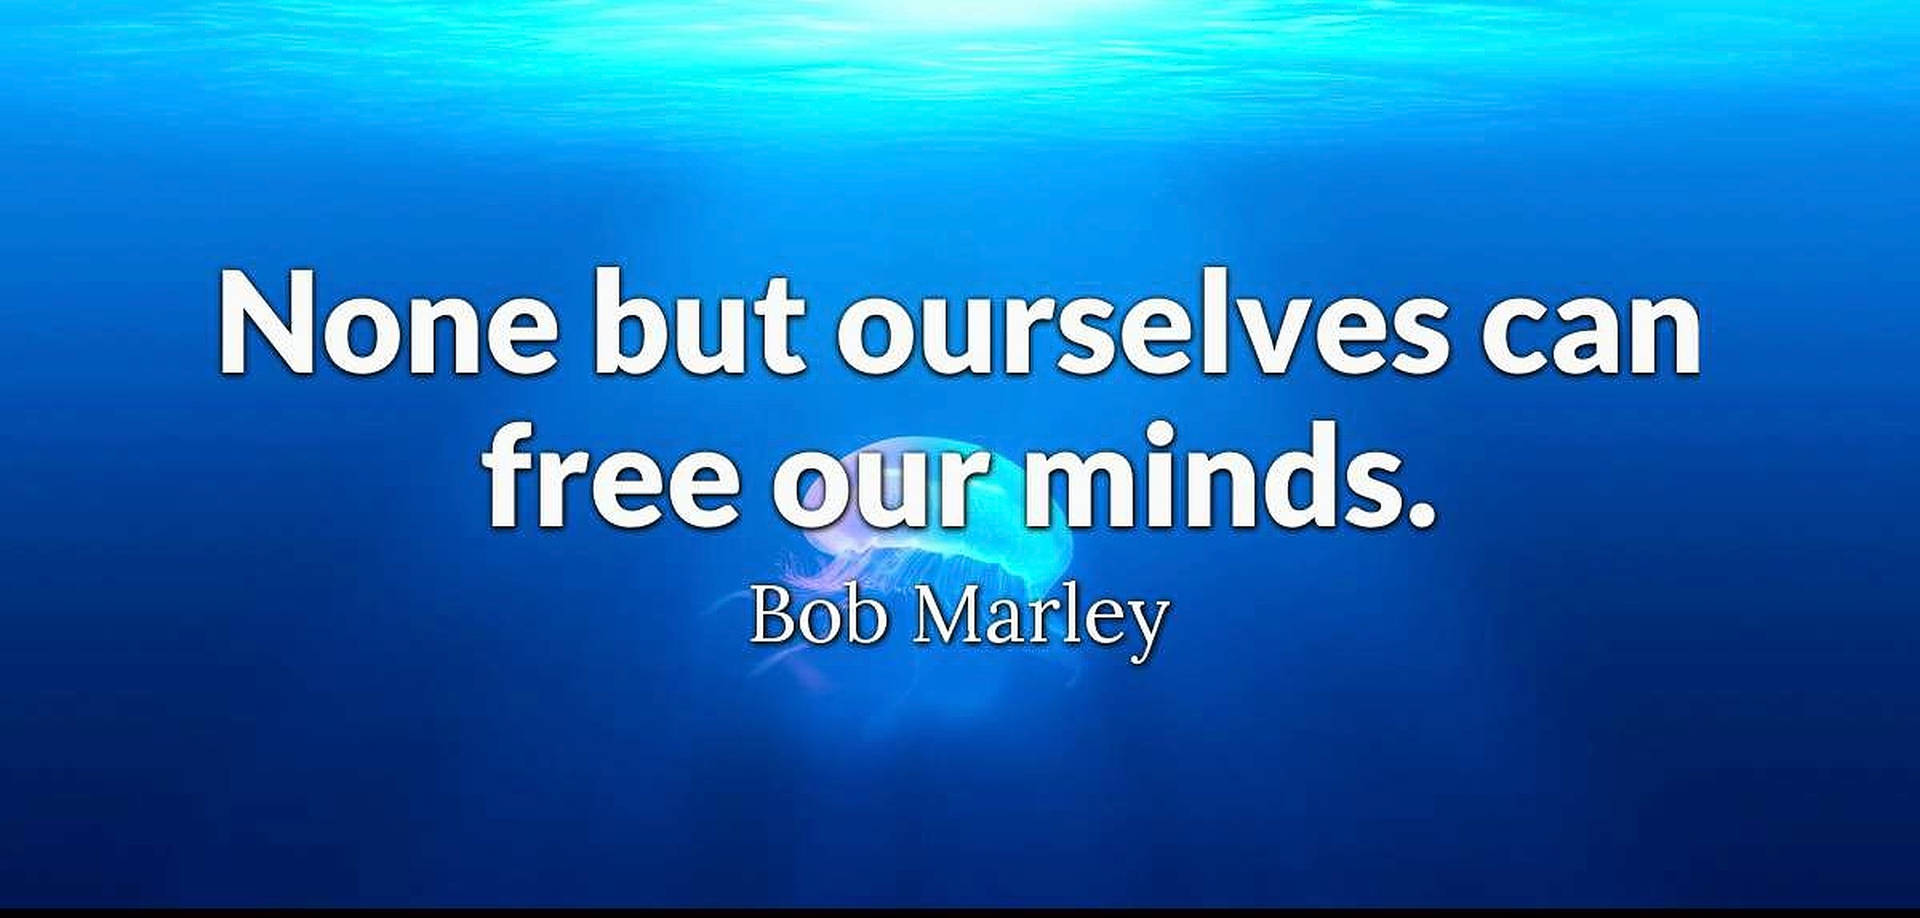 Bob Marley Quotes Ocean Background